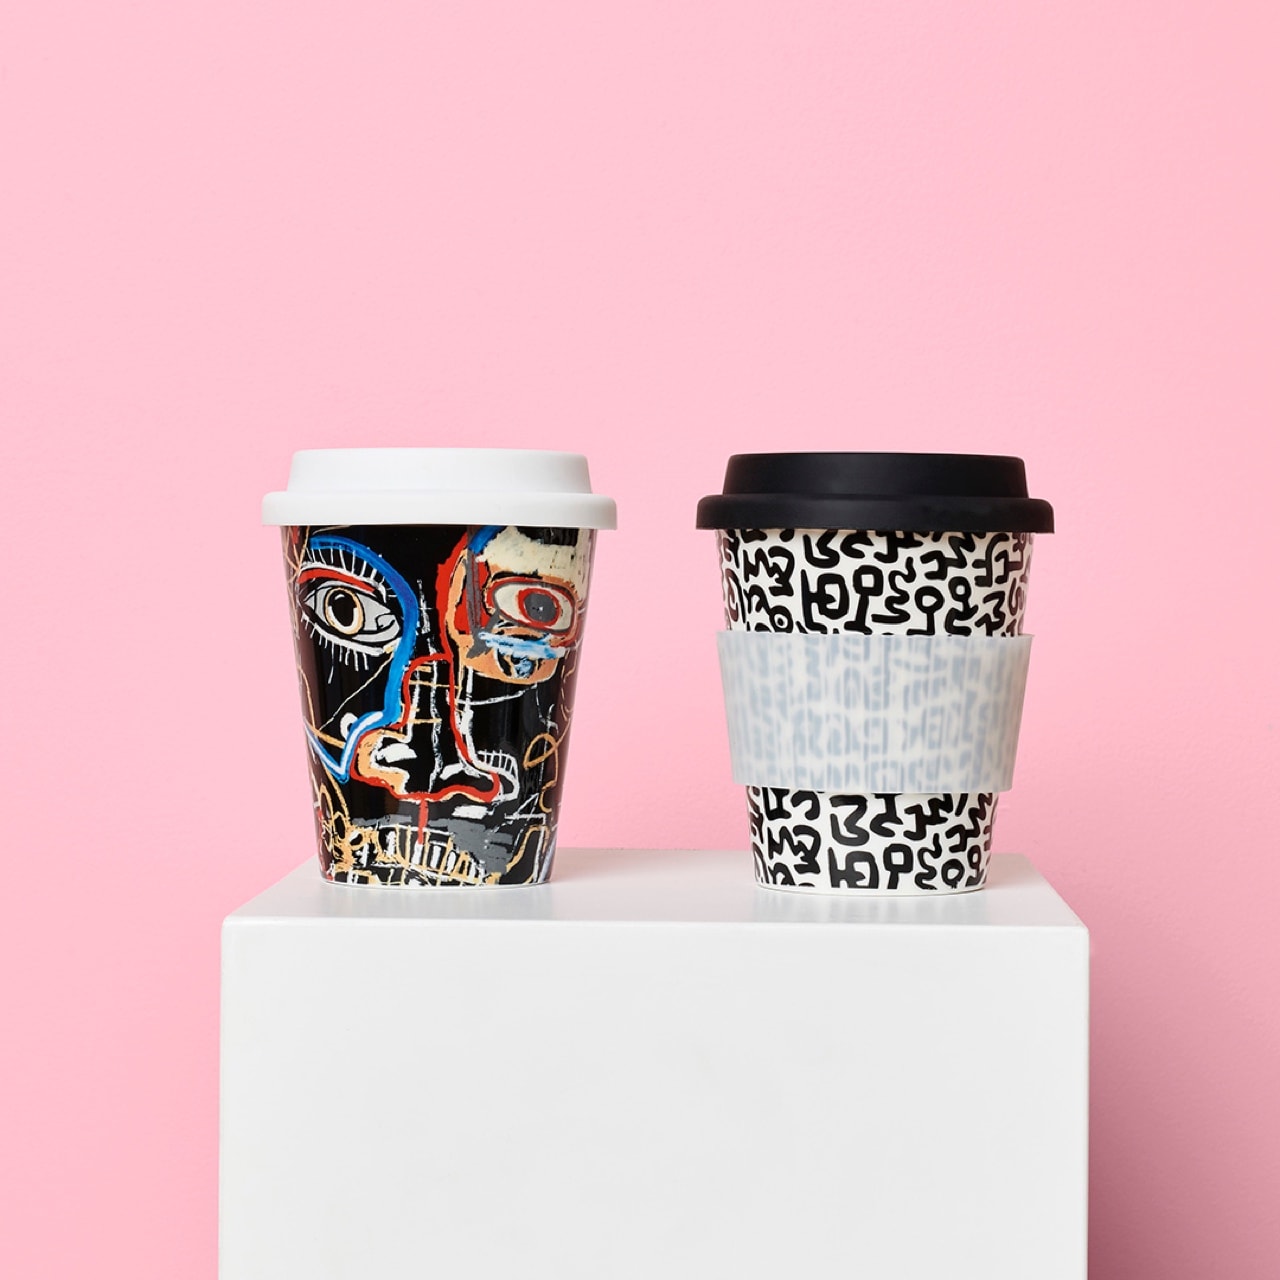 Lavazza coffee cups collaboration for <em>Keith Haring | Jean-Michel Basquiat: Crossing Lines</em>